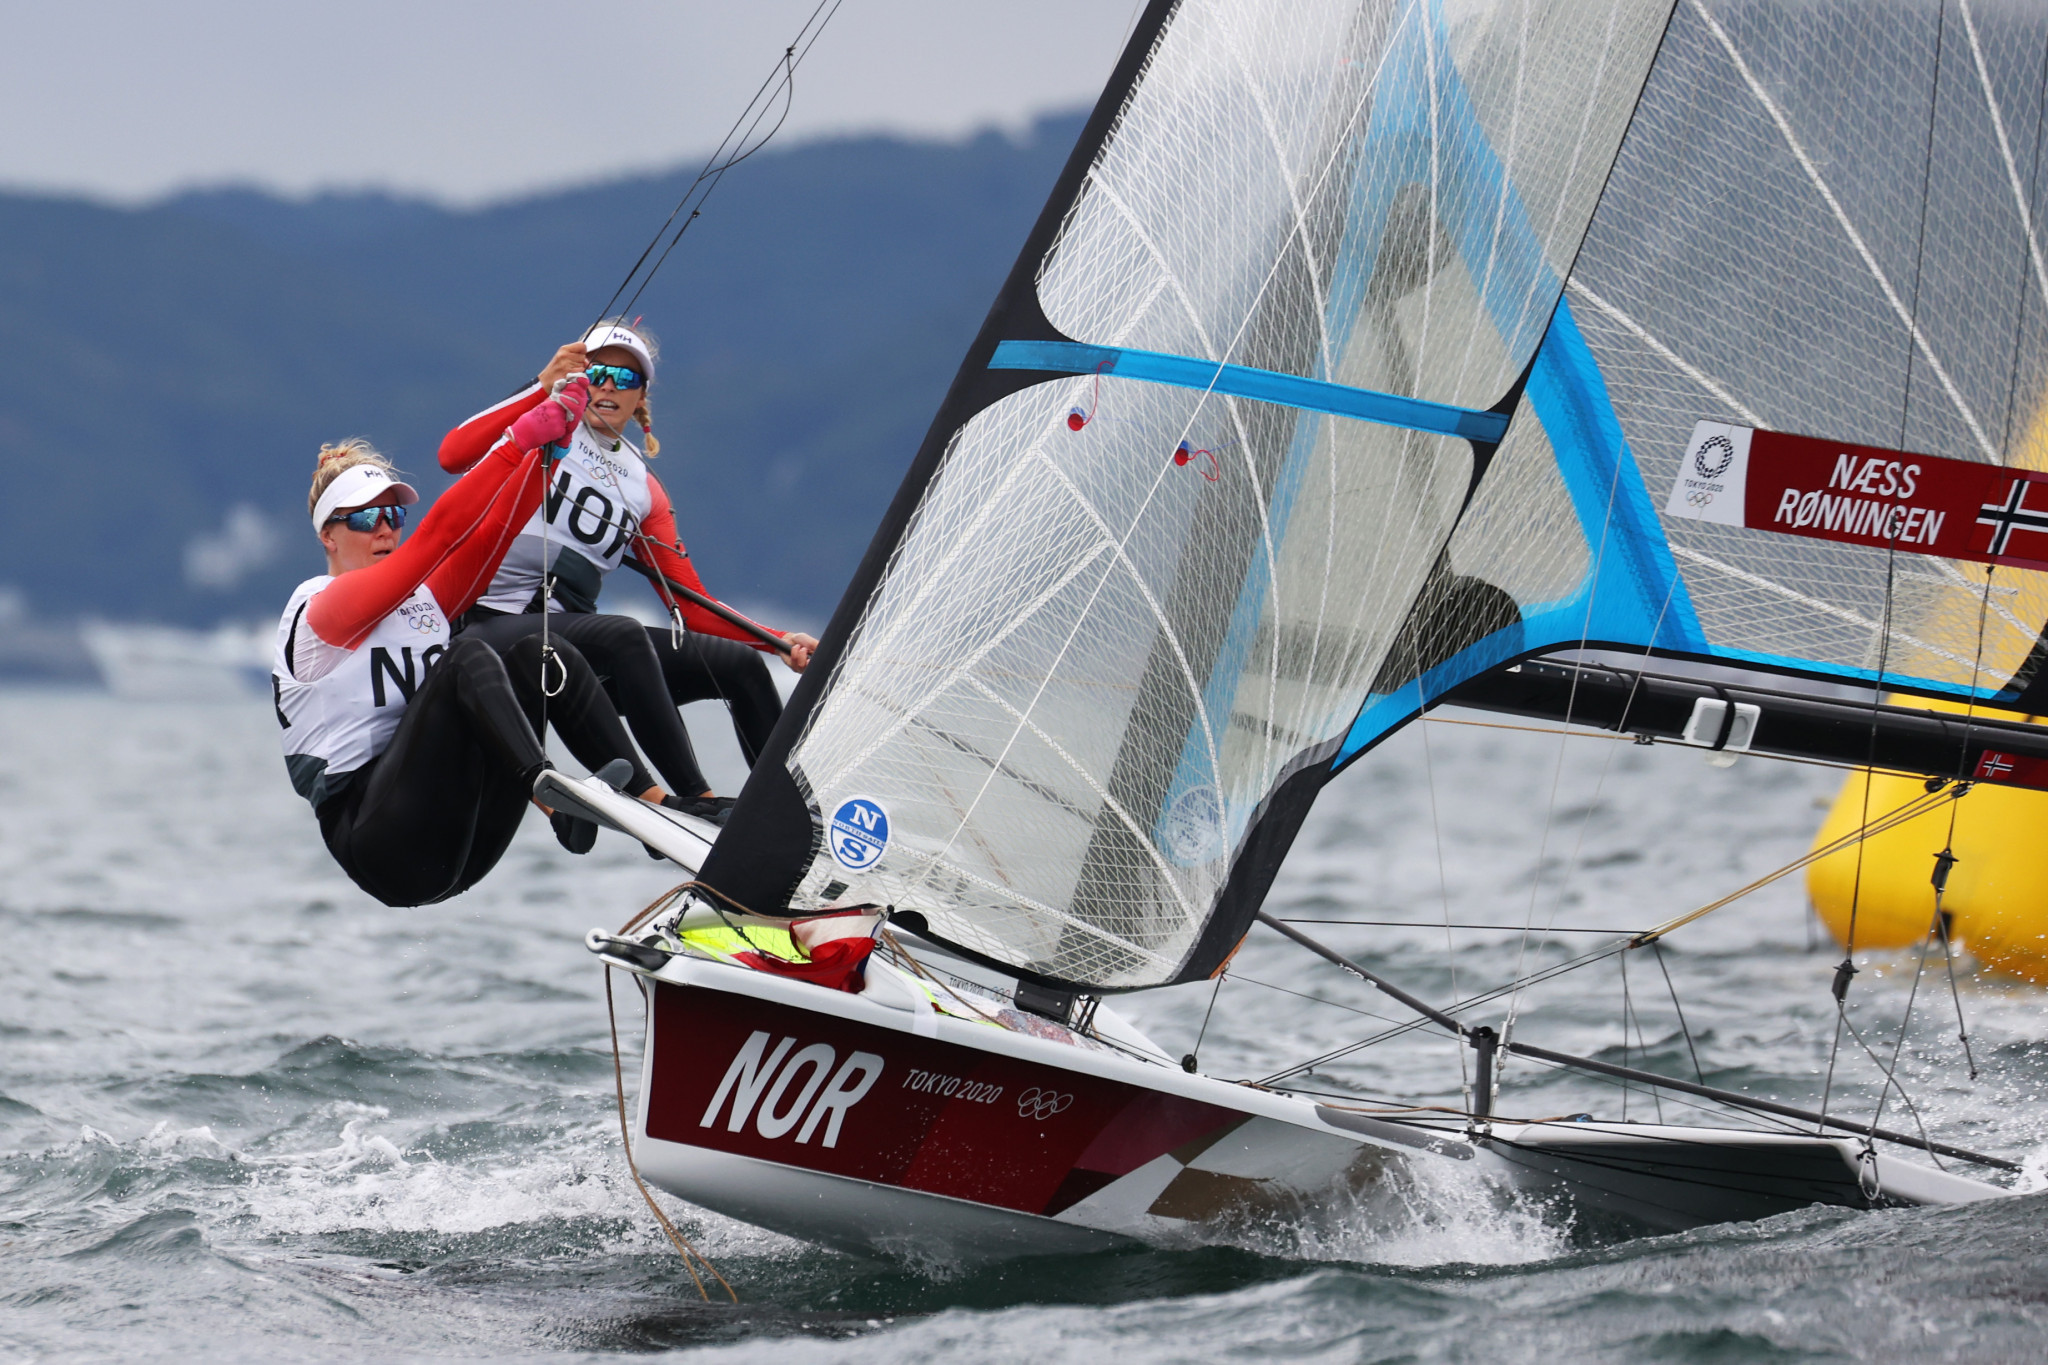 Norway's Helene Næss and Marie Rønningen moved top of the standings at the halfway stage in the 49erFX at the World Championships ©Getty Images